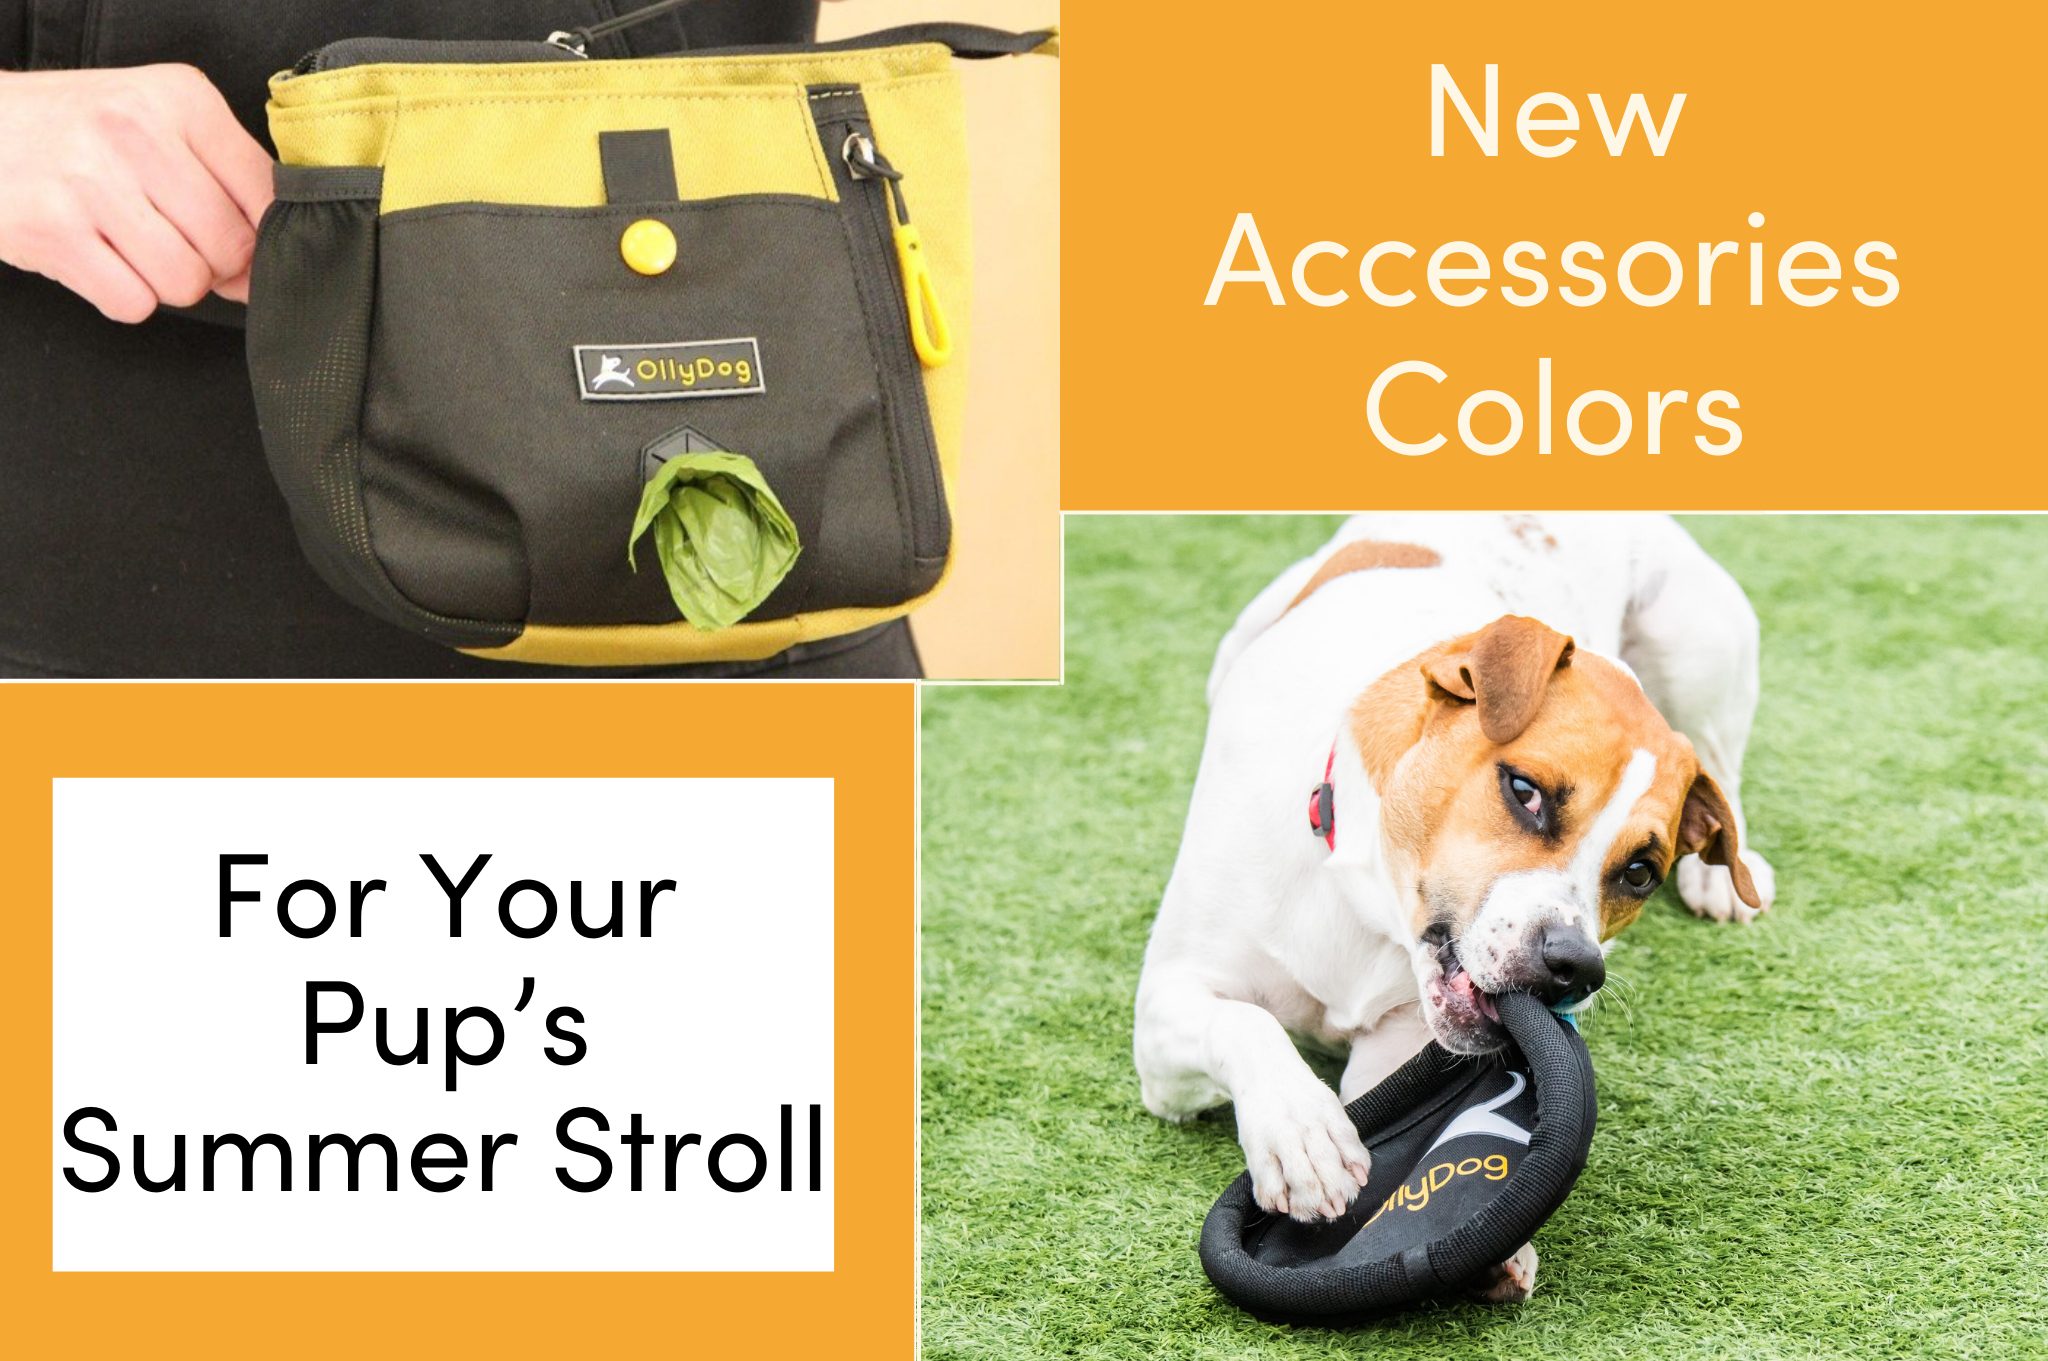 New Accessories Colors Are Available For Your Pup’s Summer Stroll